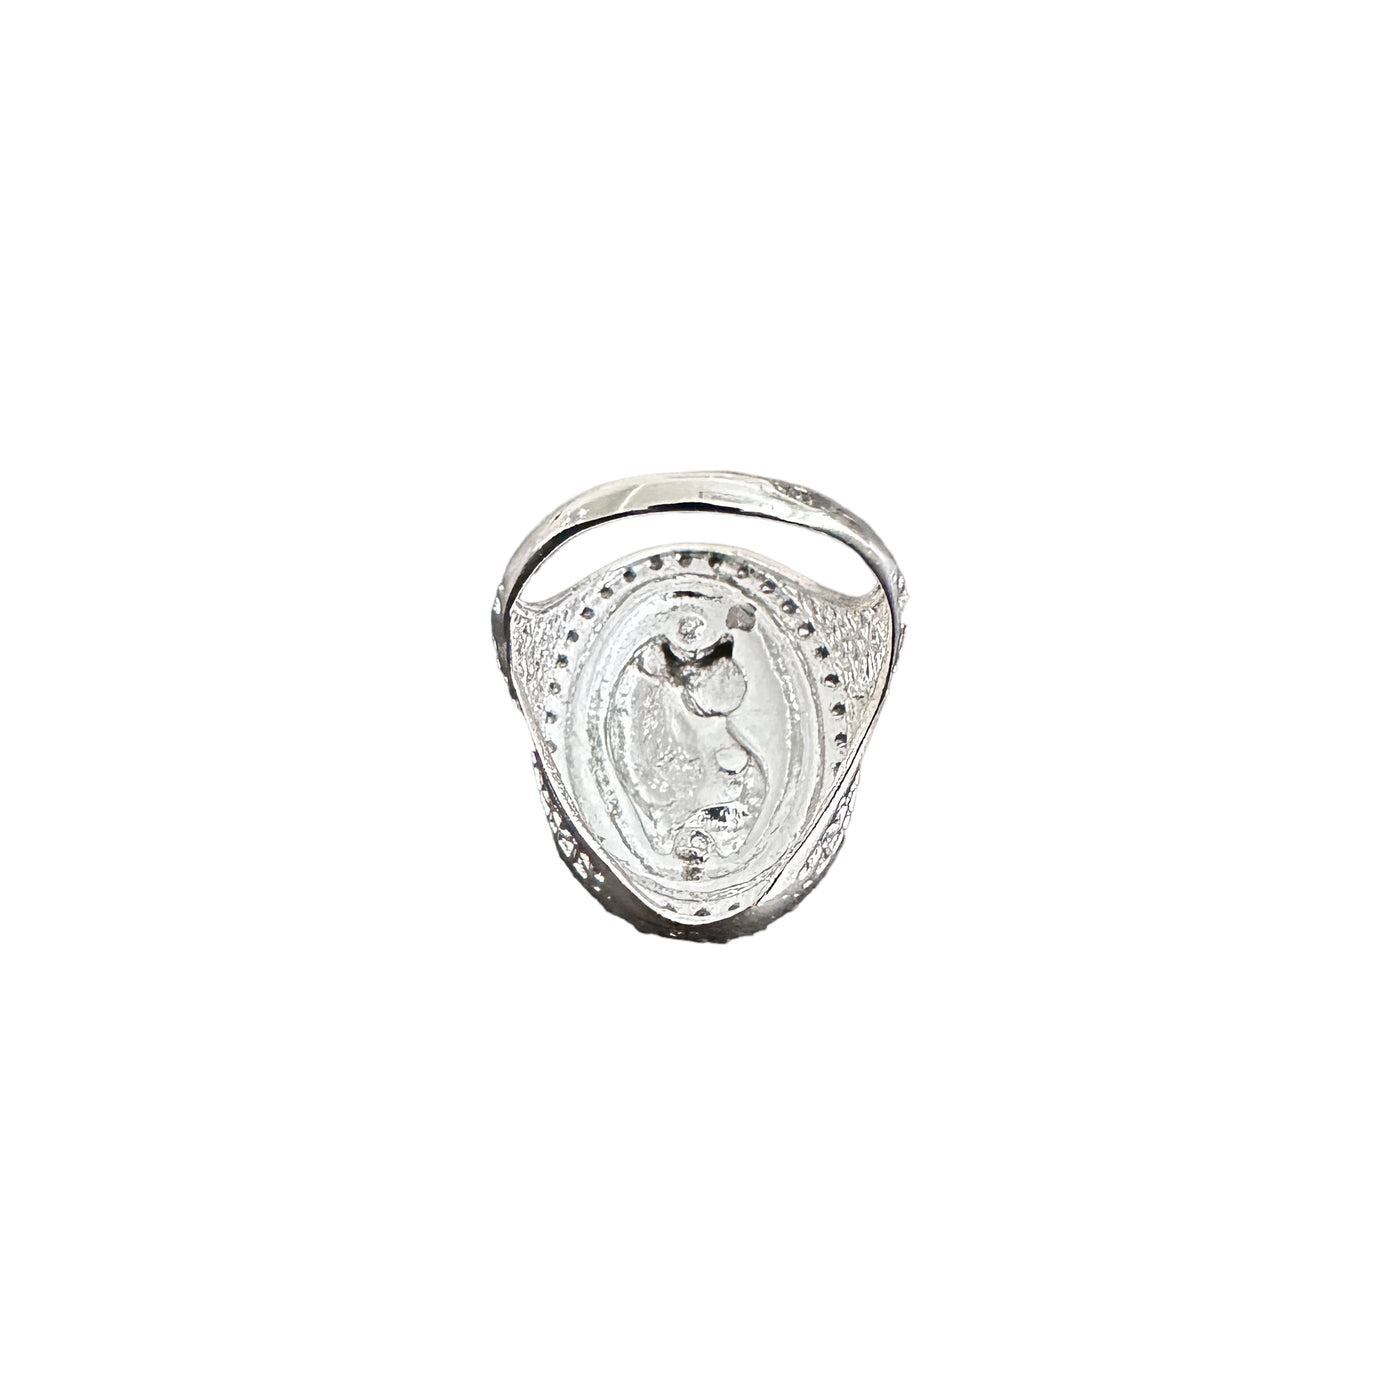 Made in Palestine Onsa Coin Replica Sterling Silver Ring